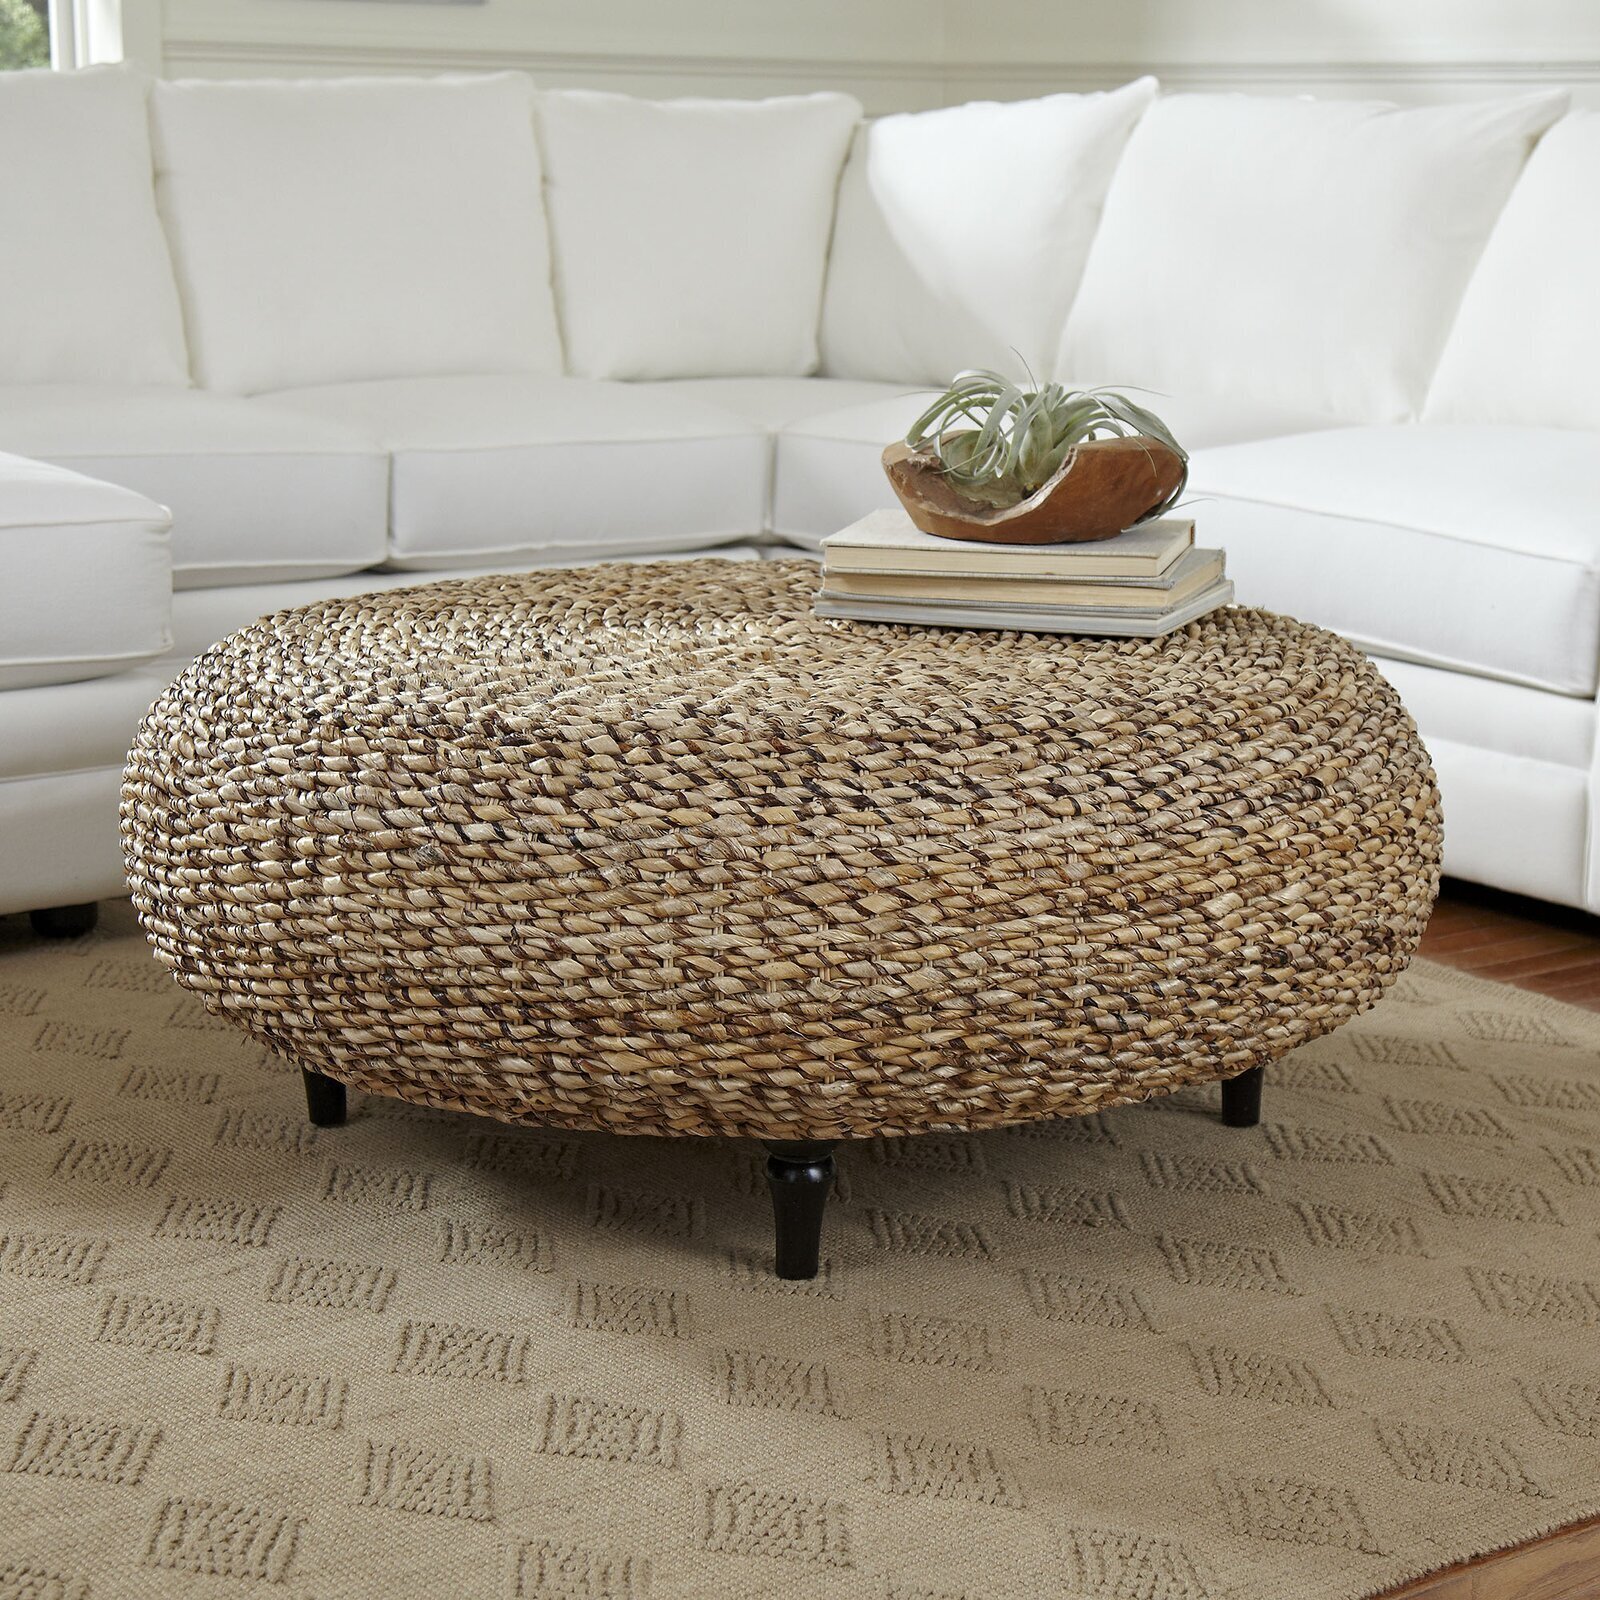 Low coffee table design